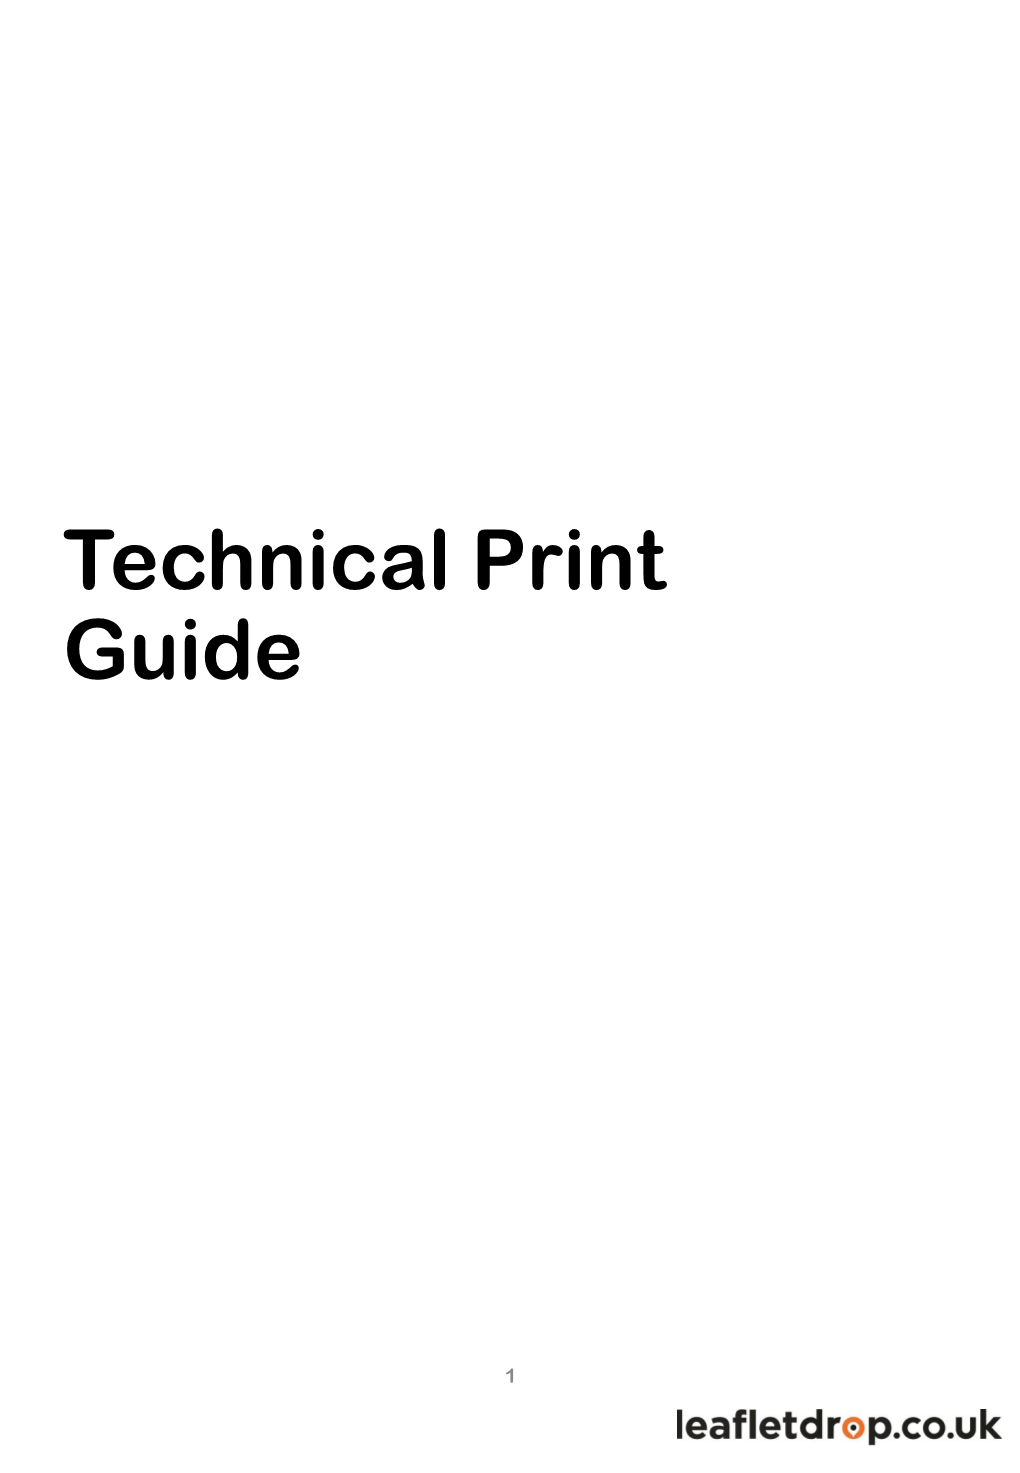 Technical Print Guide